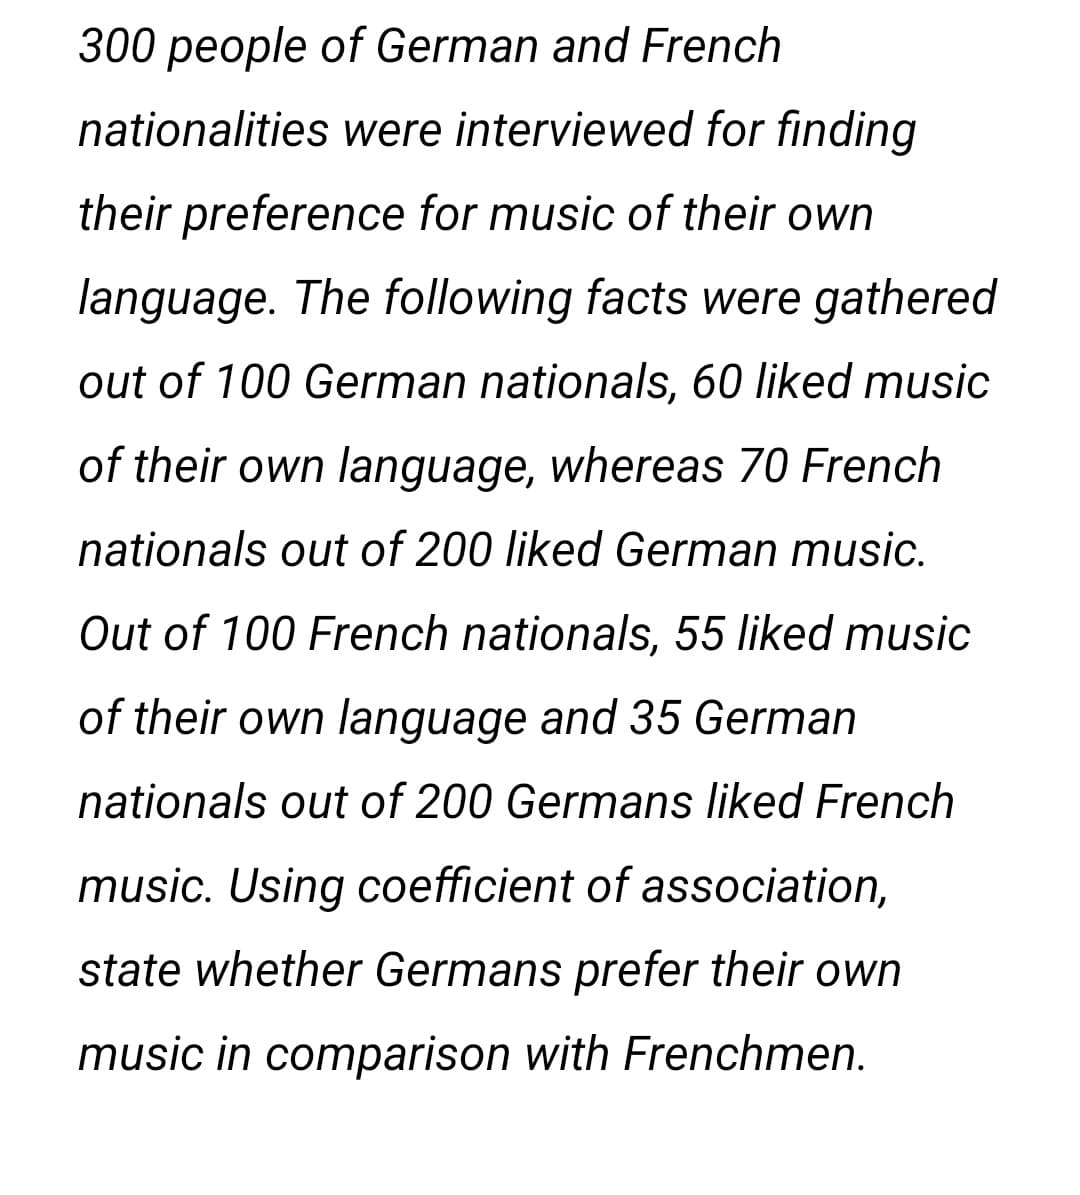 300 people of German and French
nationalities were interviewed for finding
their preference for music of their own
language. The following facts were gathered
out of 100 German nationals, 60 liked music
of their own language, whereas 70 French
nationals out of 200 liked German music.
Out of 100 French nationals, 55 liked music
of their own language and 35 German
nationals out of 200 Germans liked French
music. Using coefficient of association,
state whether Germans prefer their own
music in comparison with Frenchmen.
